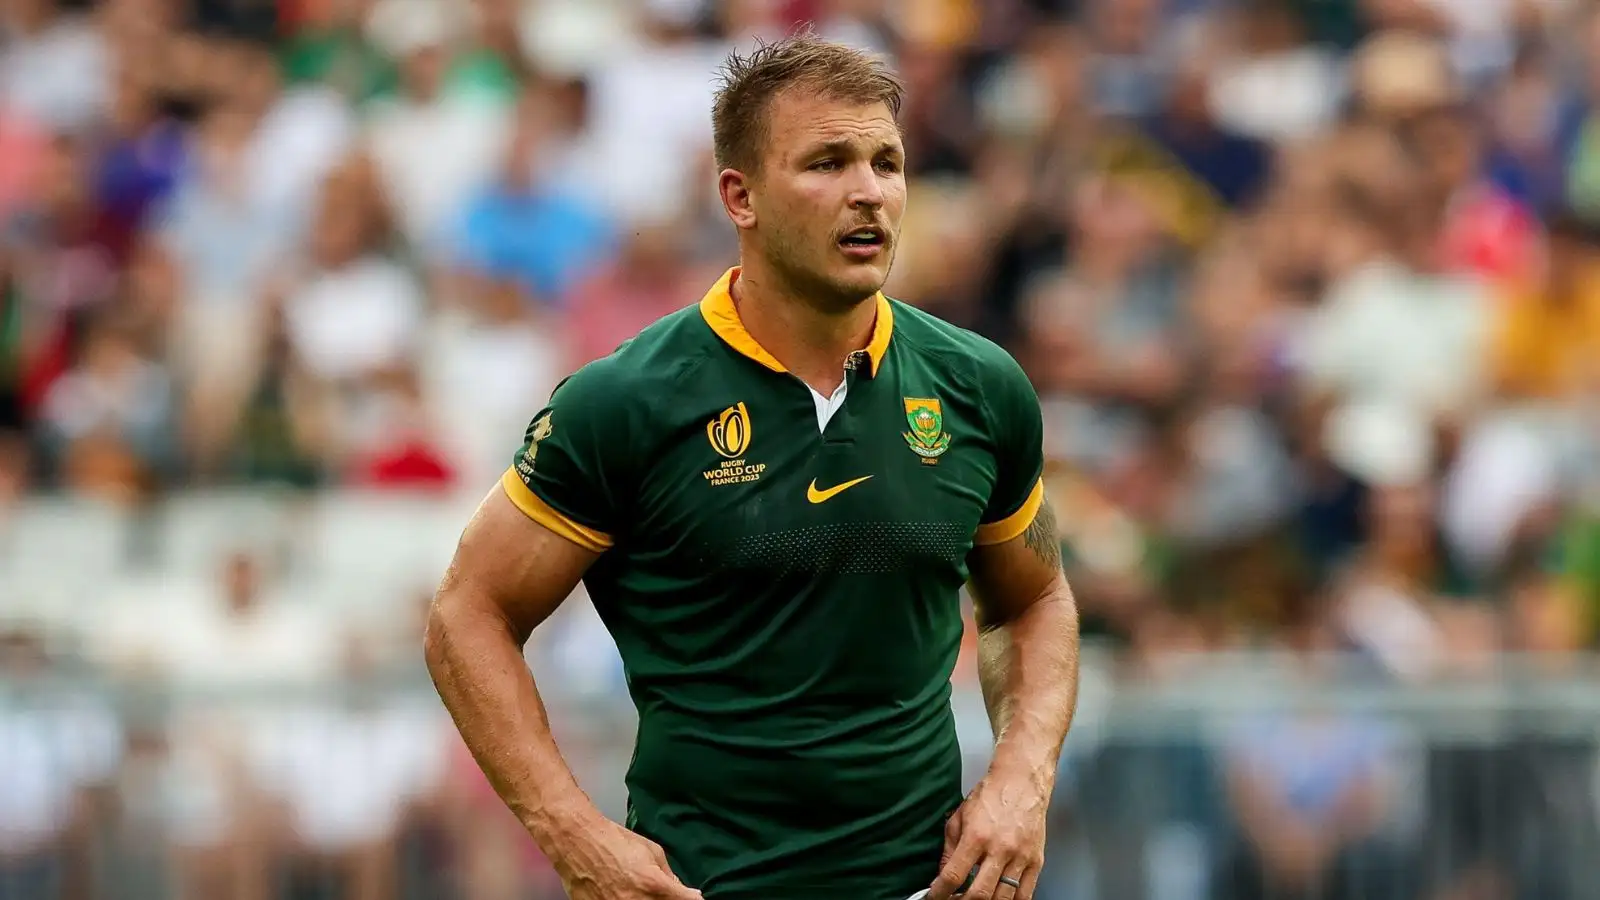 Springboks centre Andre Esterhuizen during the Rugby World Cup France 2023 match between South Africa and Romania at Stade de Bordeaux on September 17, 2023 in Bordeaux, France.